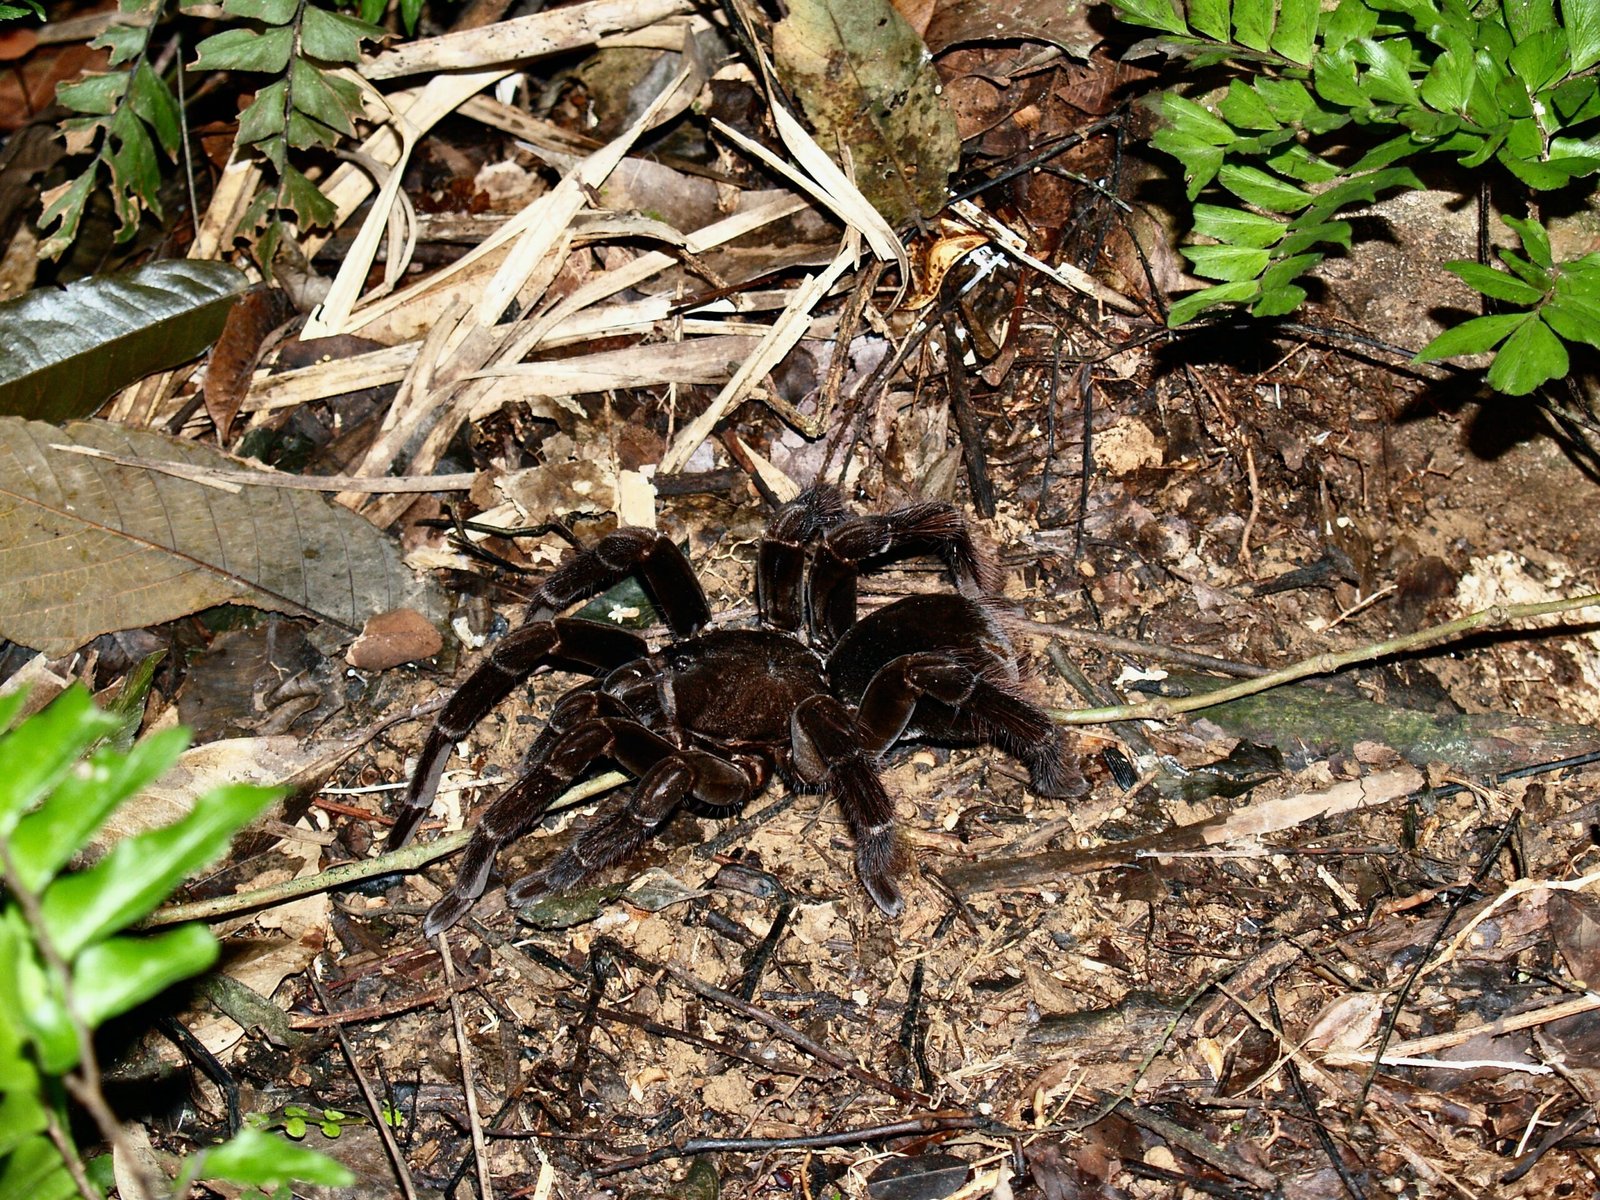 What Is The Lifespan Of Different Tarantula Species In Captivity?